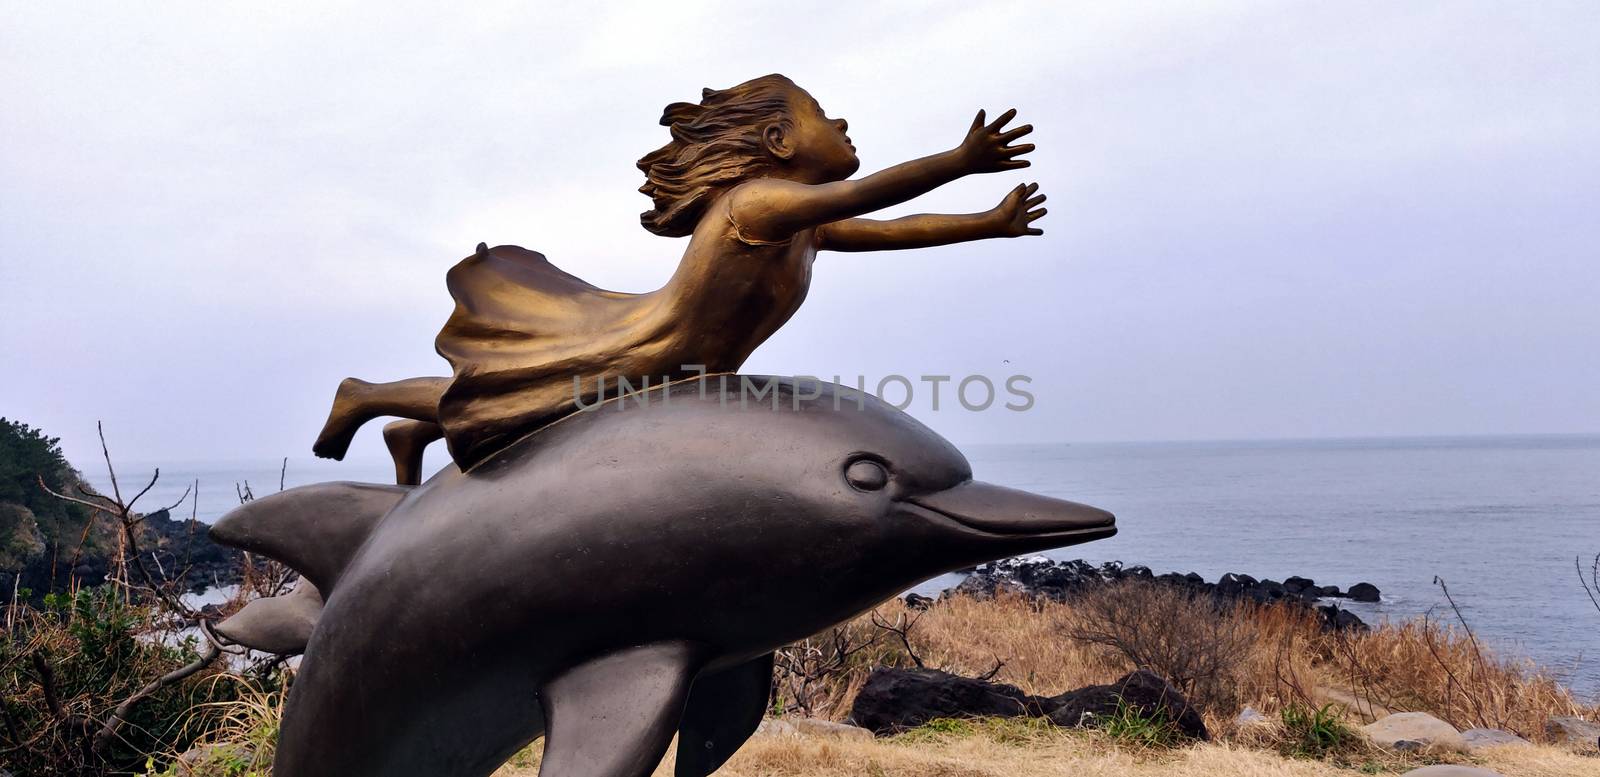 A girl statue with outstretched arms with a dolphin underneath in Jeju Island, South Korea by mshivangi92